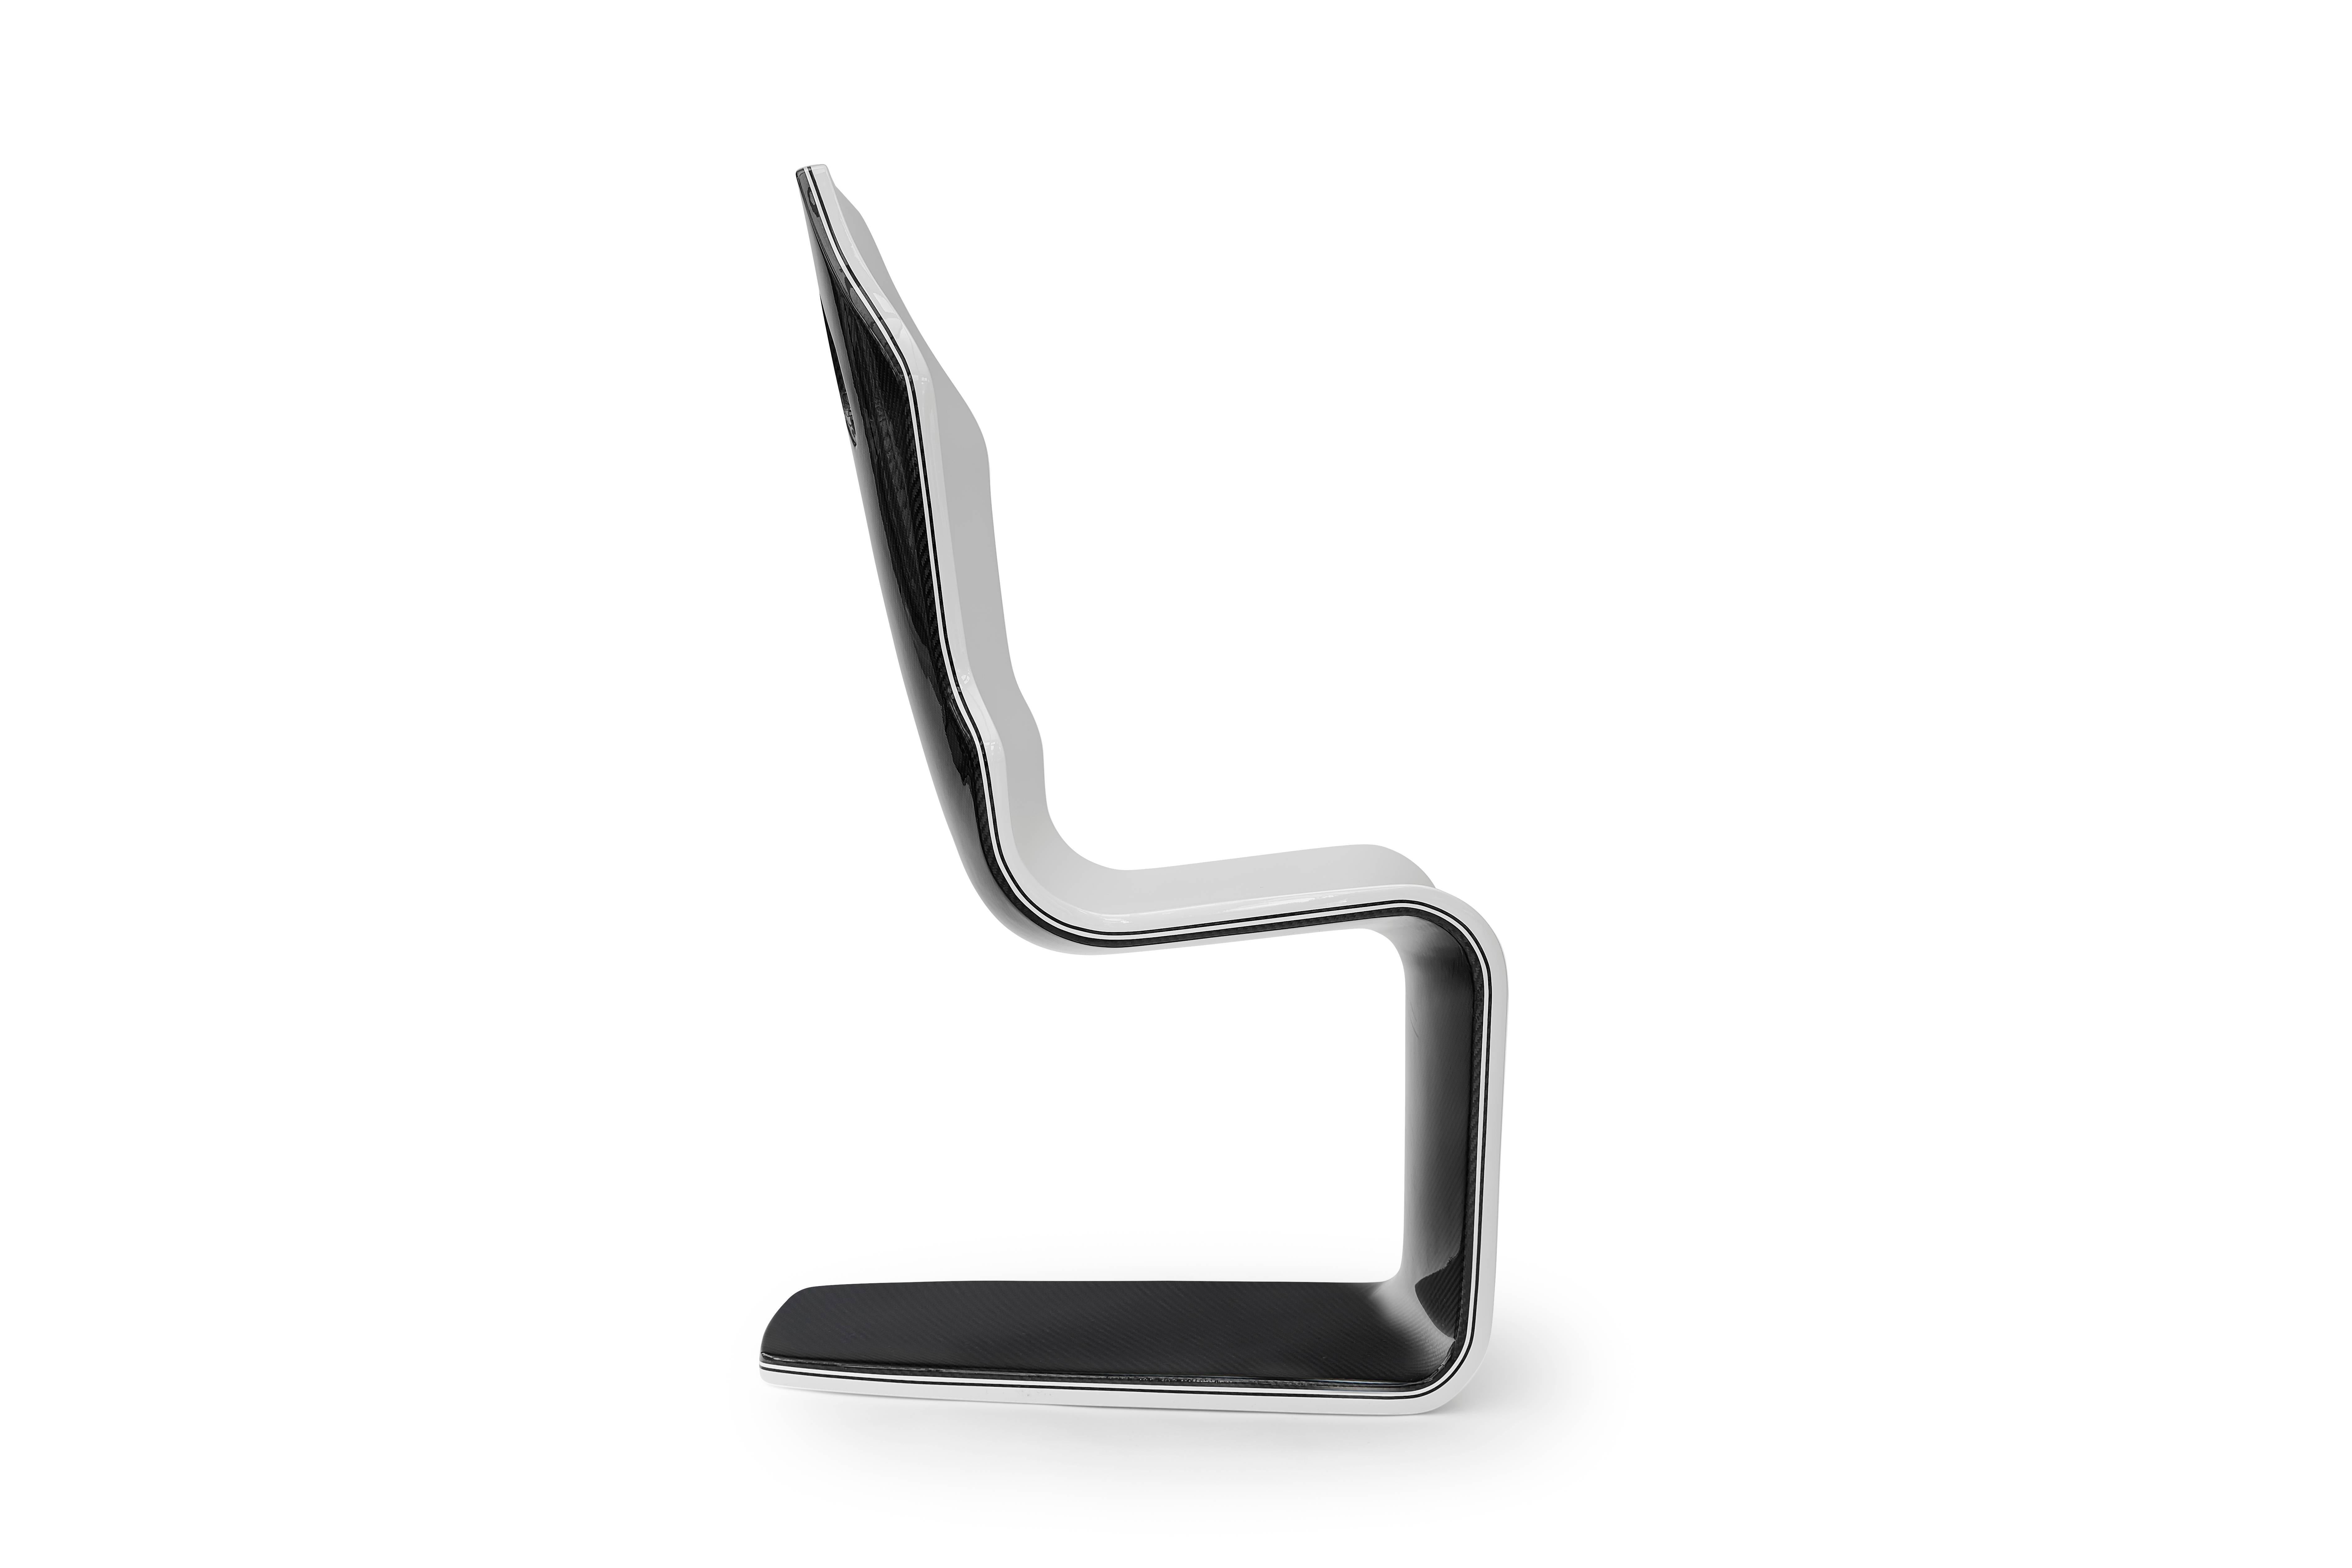 The best pieces of art are jaw-dropping at every angle, and the F1 carbon fiber lounge takes its cues from the speed and sleekness of the race track. Inspired by some of the world’s most breathtaking exotic cars, this is a chair that seems to hum